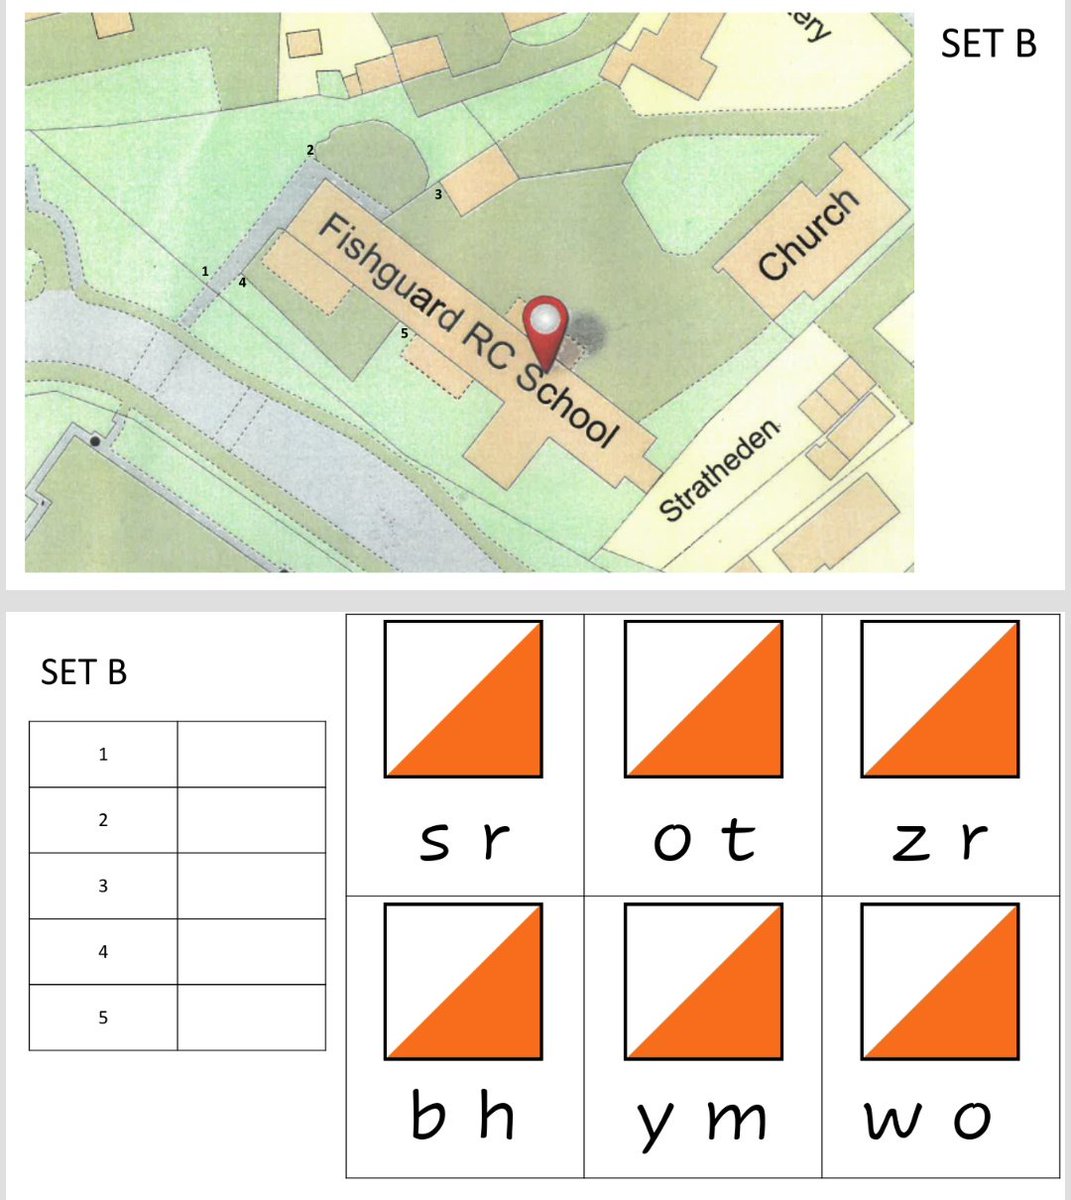 Loved setting up 5 simple orienteering courses in school today for #outdoorclassroomday #outdoorlearning #orienteering